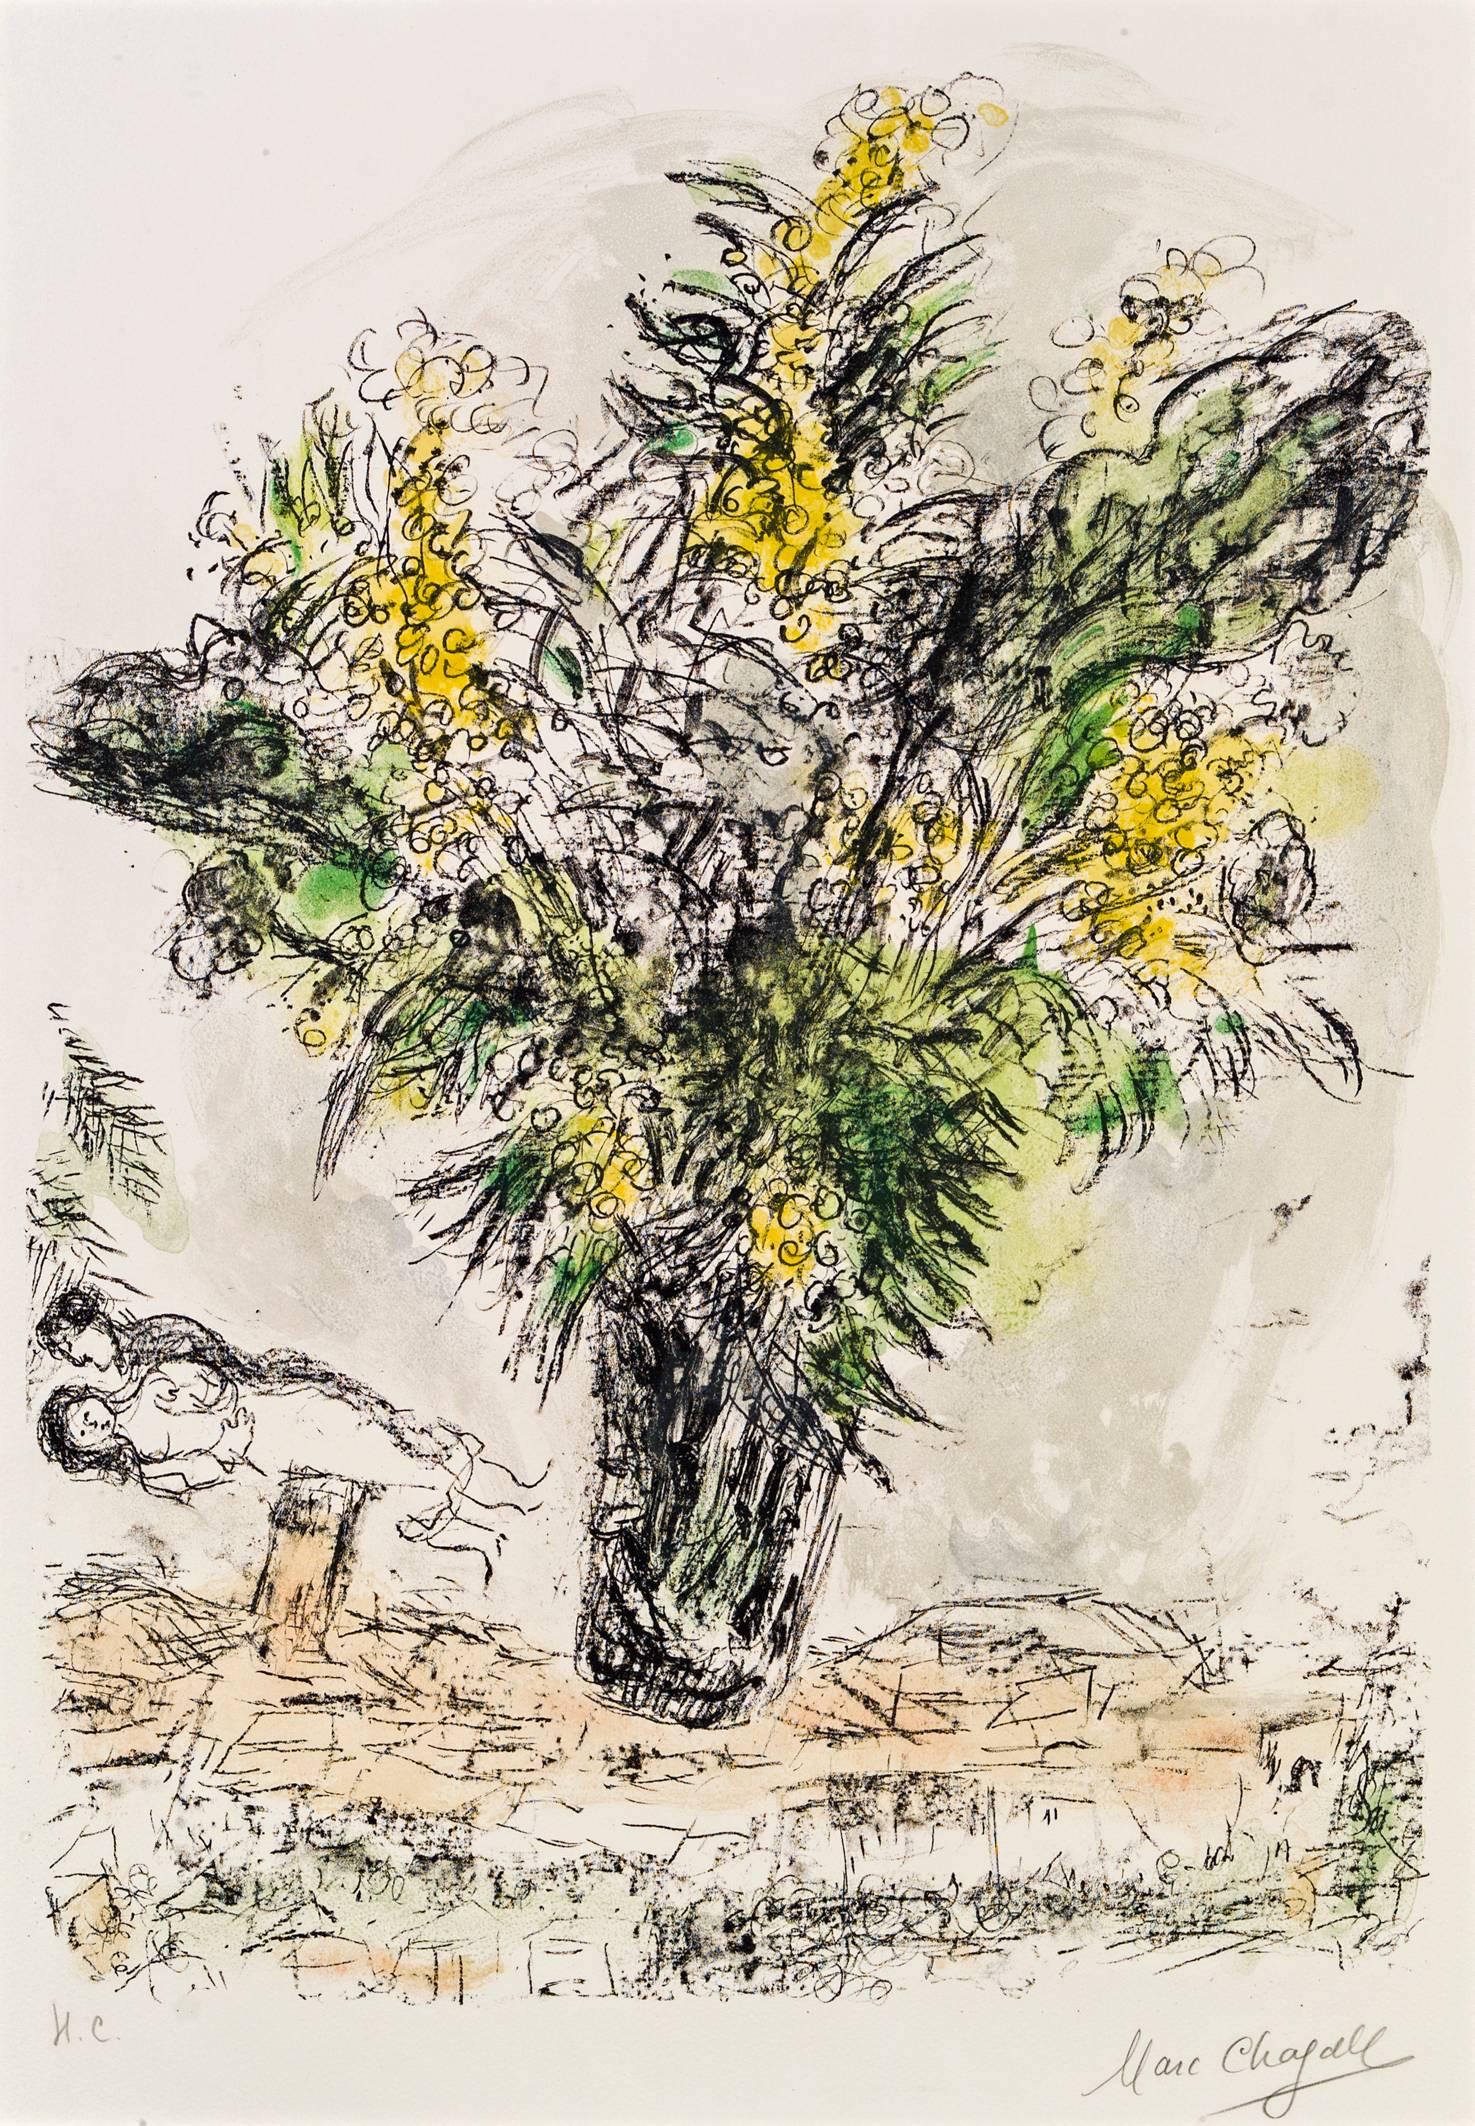 Titled with ''Les Mimosas'' this work was issued by Chagall in 1968 in Paris.
Printed by the fine art workshop of the Mourlot Brothers, the work is hand signed in pencil with ''Marc Chagall' and further labeled with ''M.C.'' on the lower